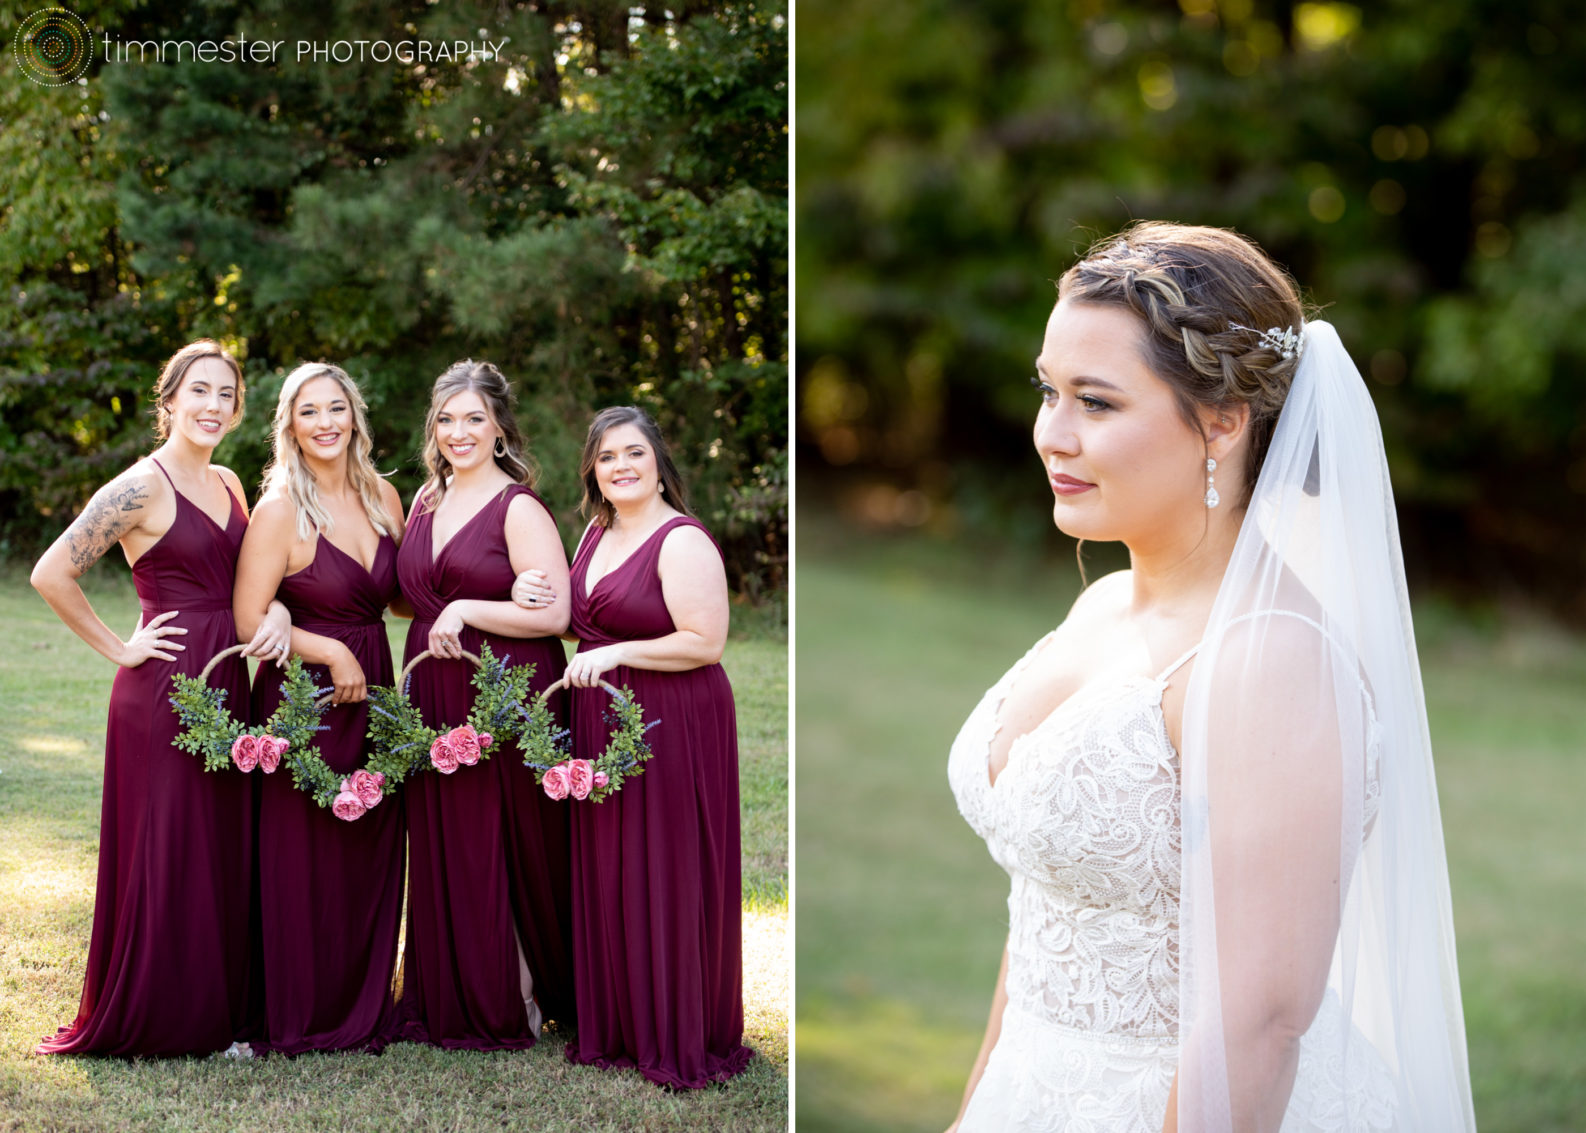 Bride and bridesmaid details for a wedding at Sugarneck in NC